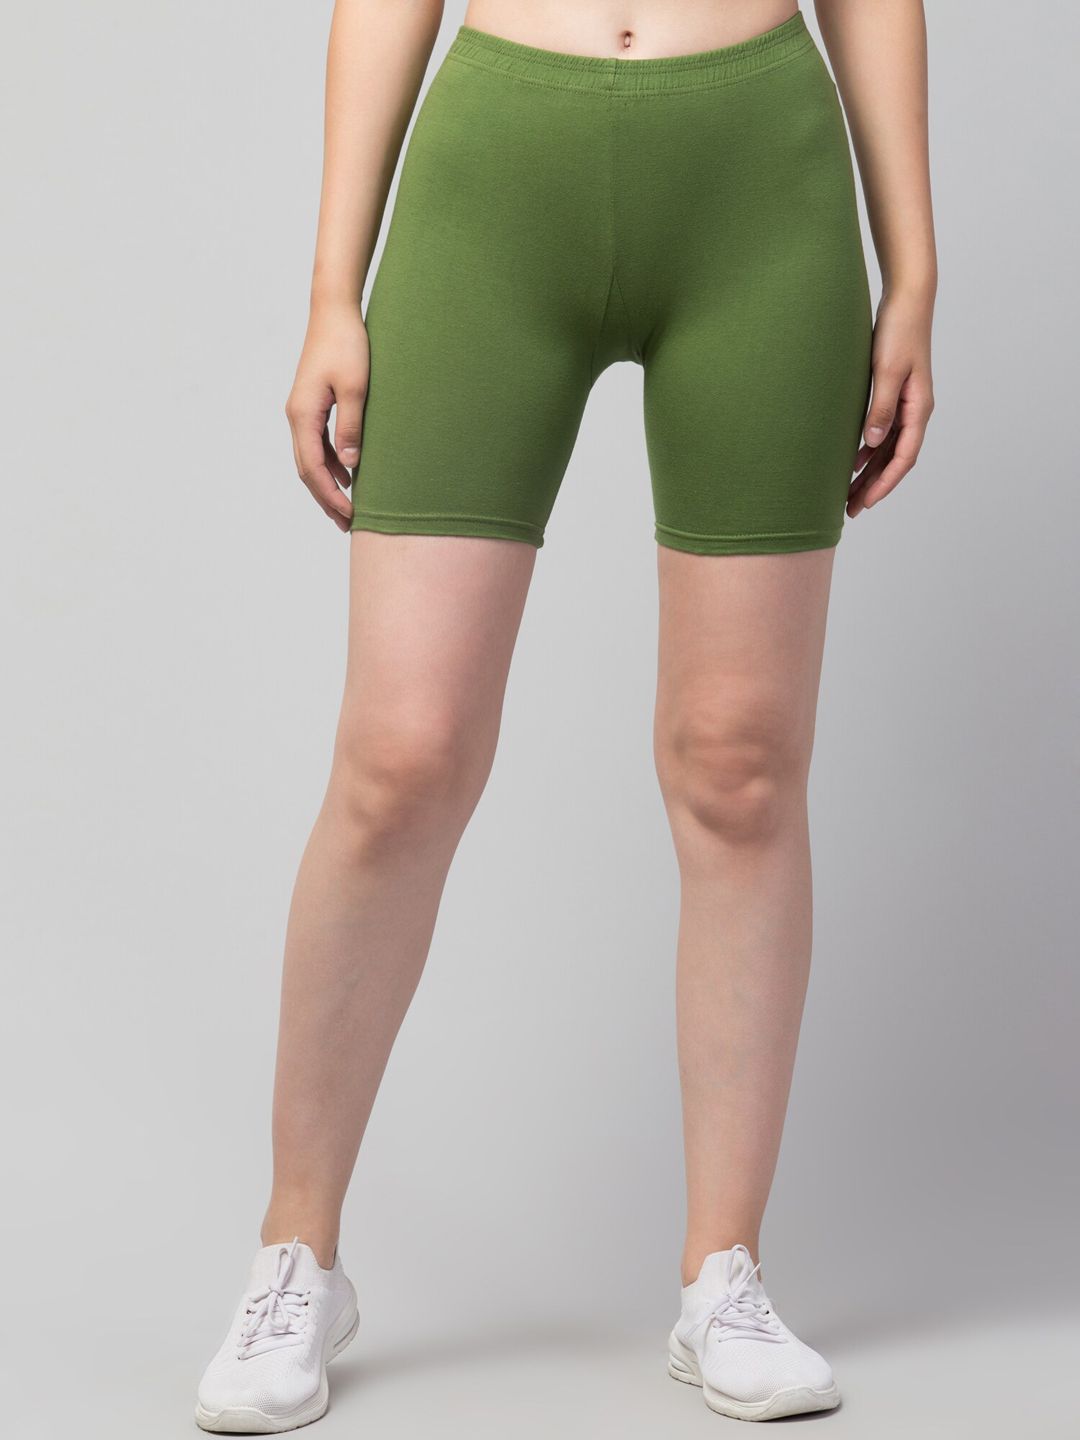 Apraa & Parma Women Skinny Fit Mid-Rise Pure Cotton Cycling Sports Shorts Price in India